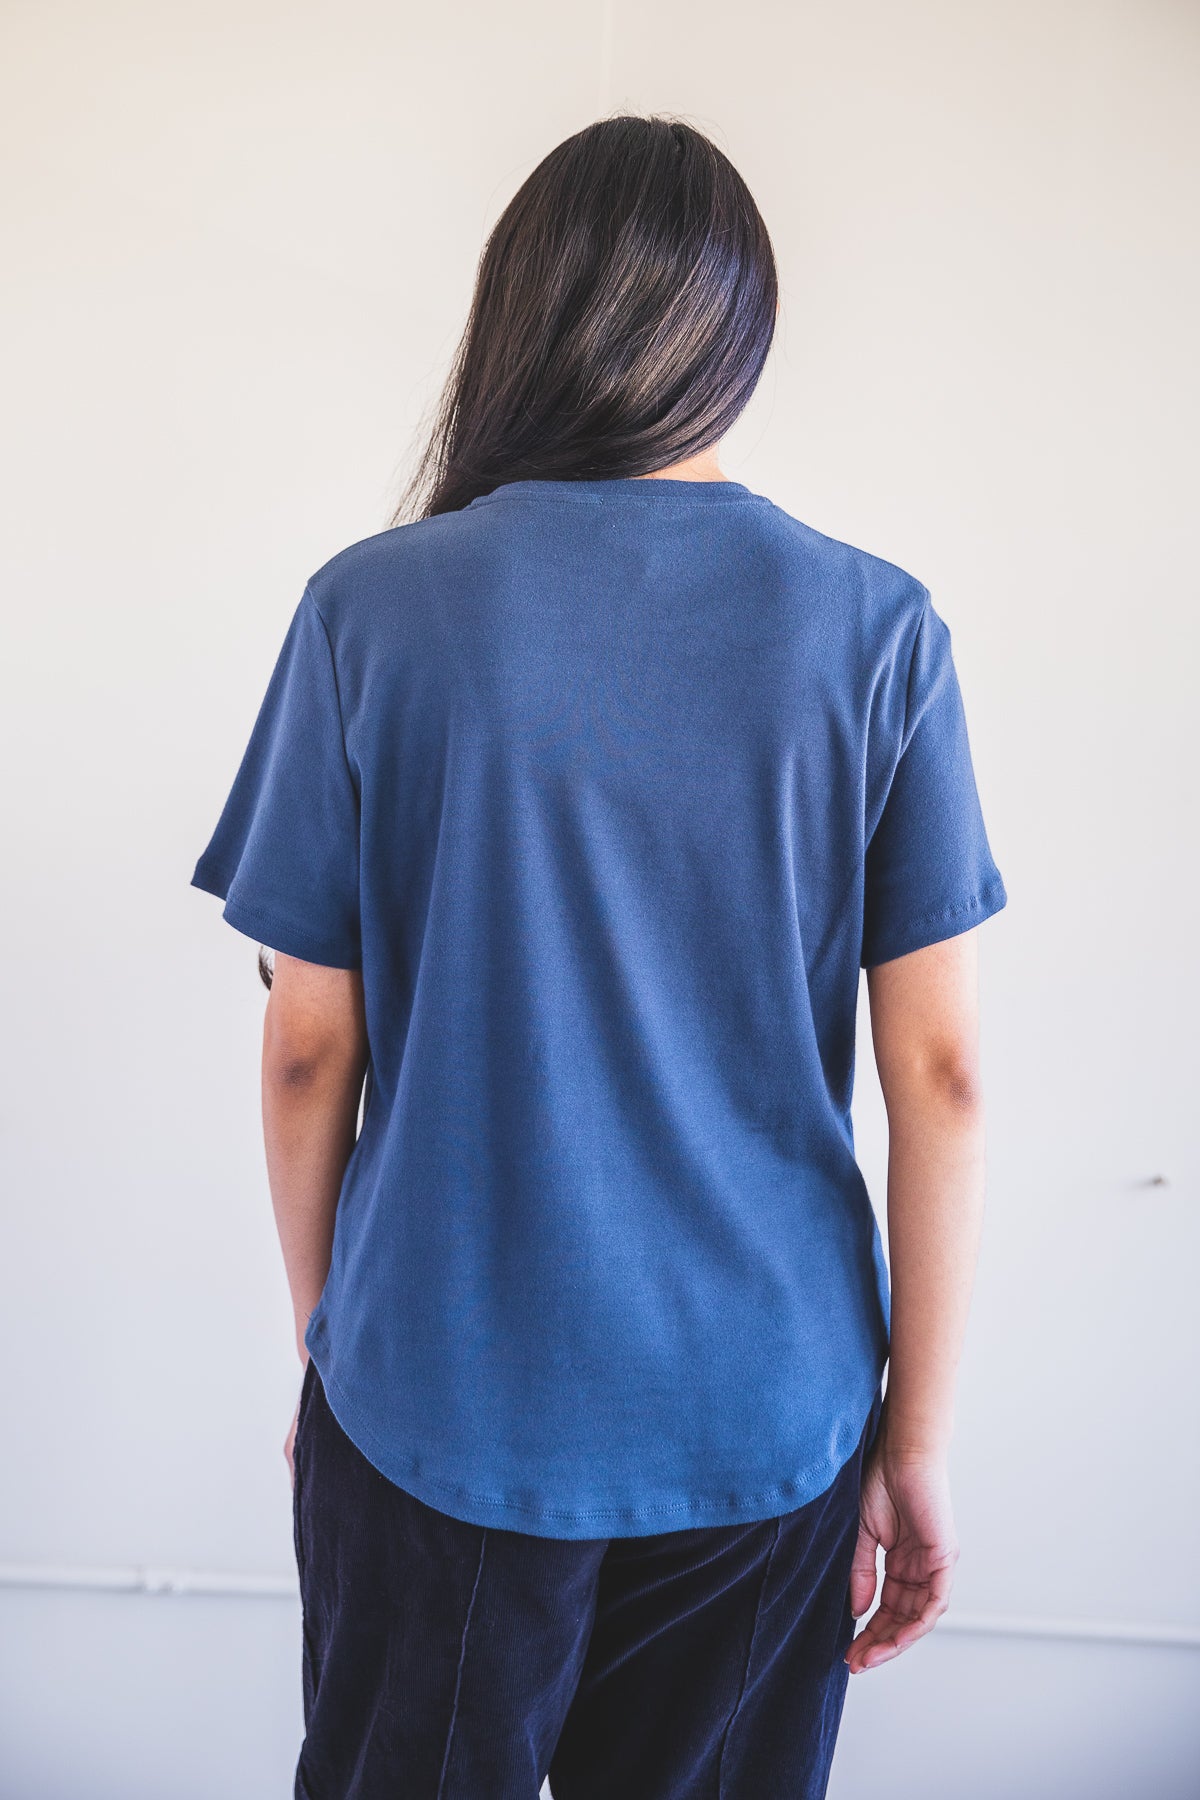 ESSENTIAL TEE SHIRT IN NIGHT BLUE BRUSHED COTTON JERSEY